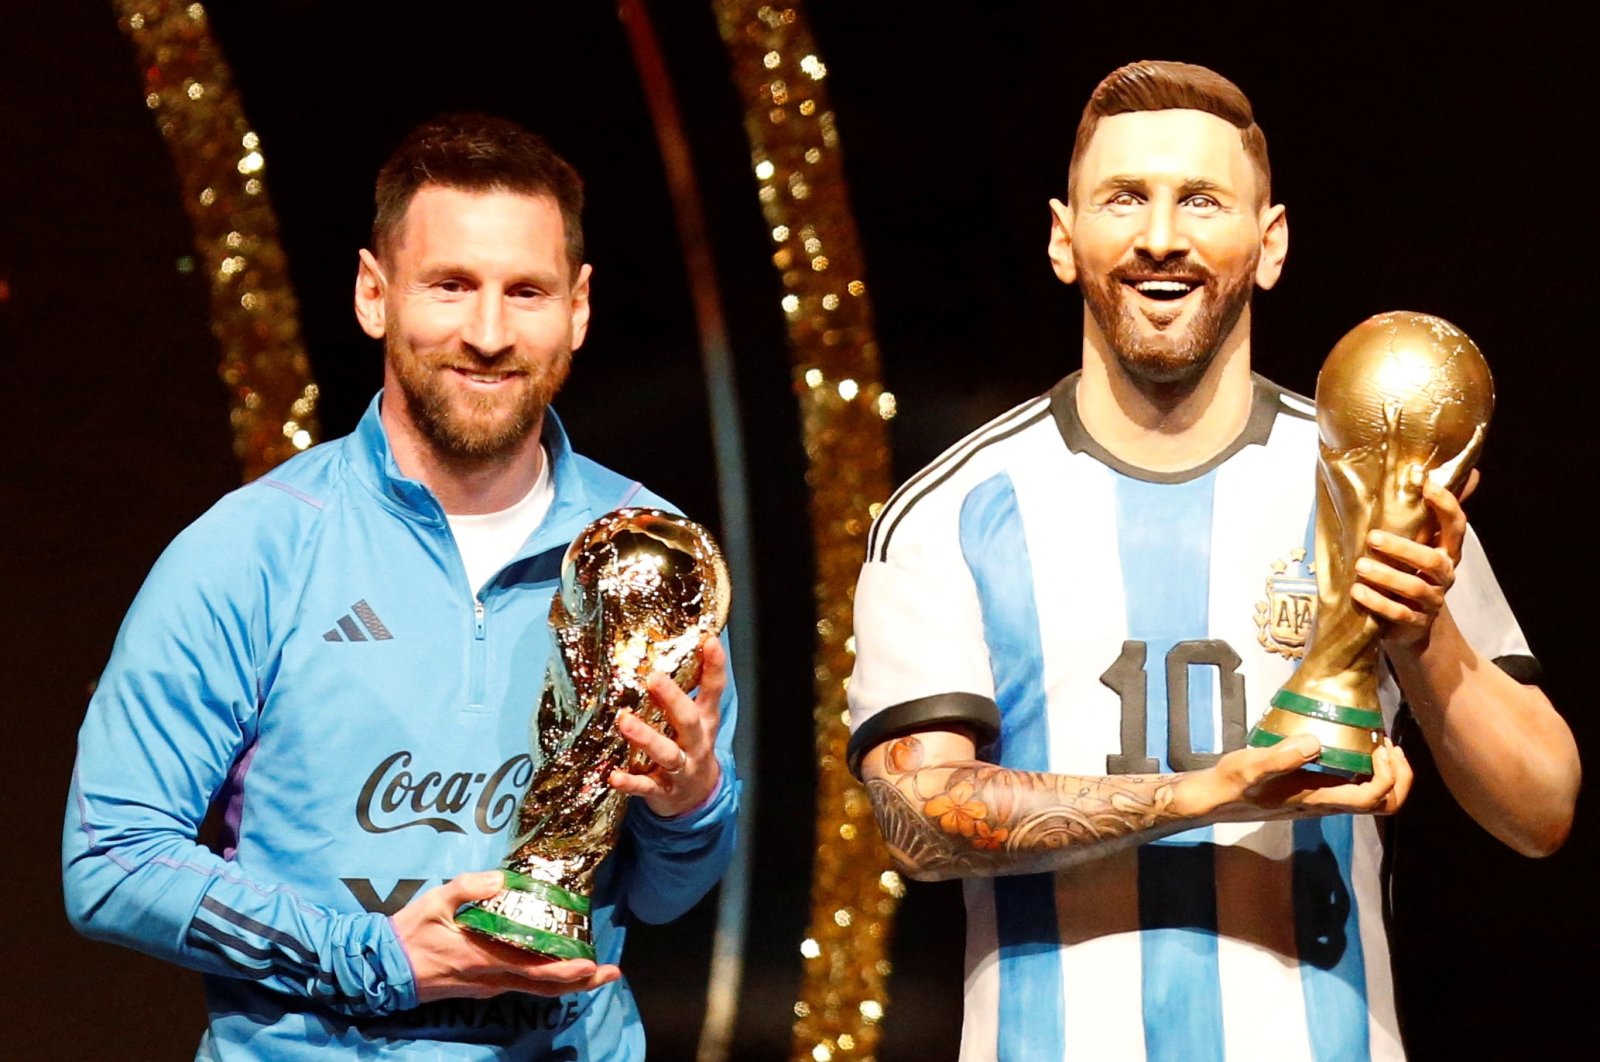 Argentina&#039;s Lionel Messi poses with a statue of himself holding the World Cup during the Conmebol event at the Conmebol headquarters, Luque, Paraguay, March 27, 2023. (Reuters Photo)